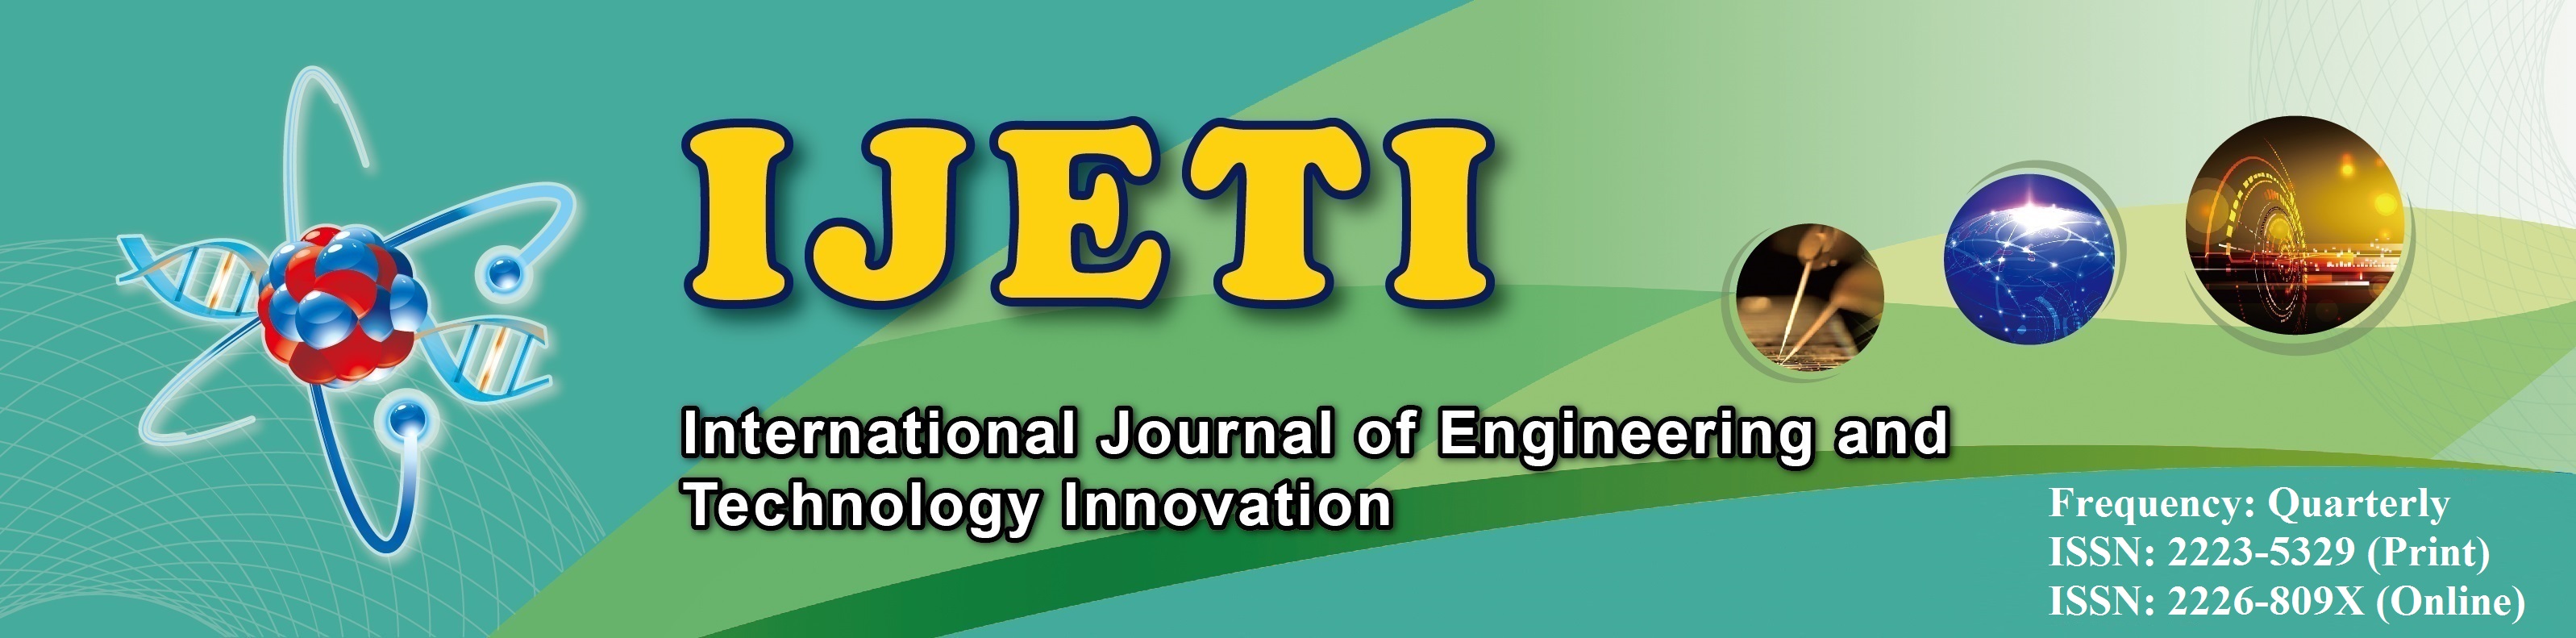 International Journal of Engineering and Technology Innovation